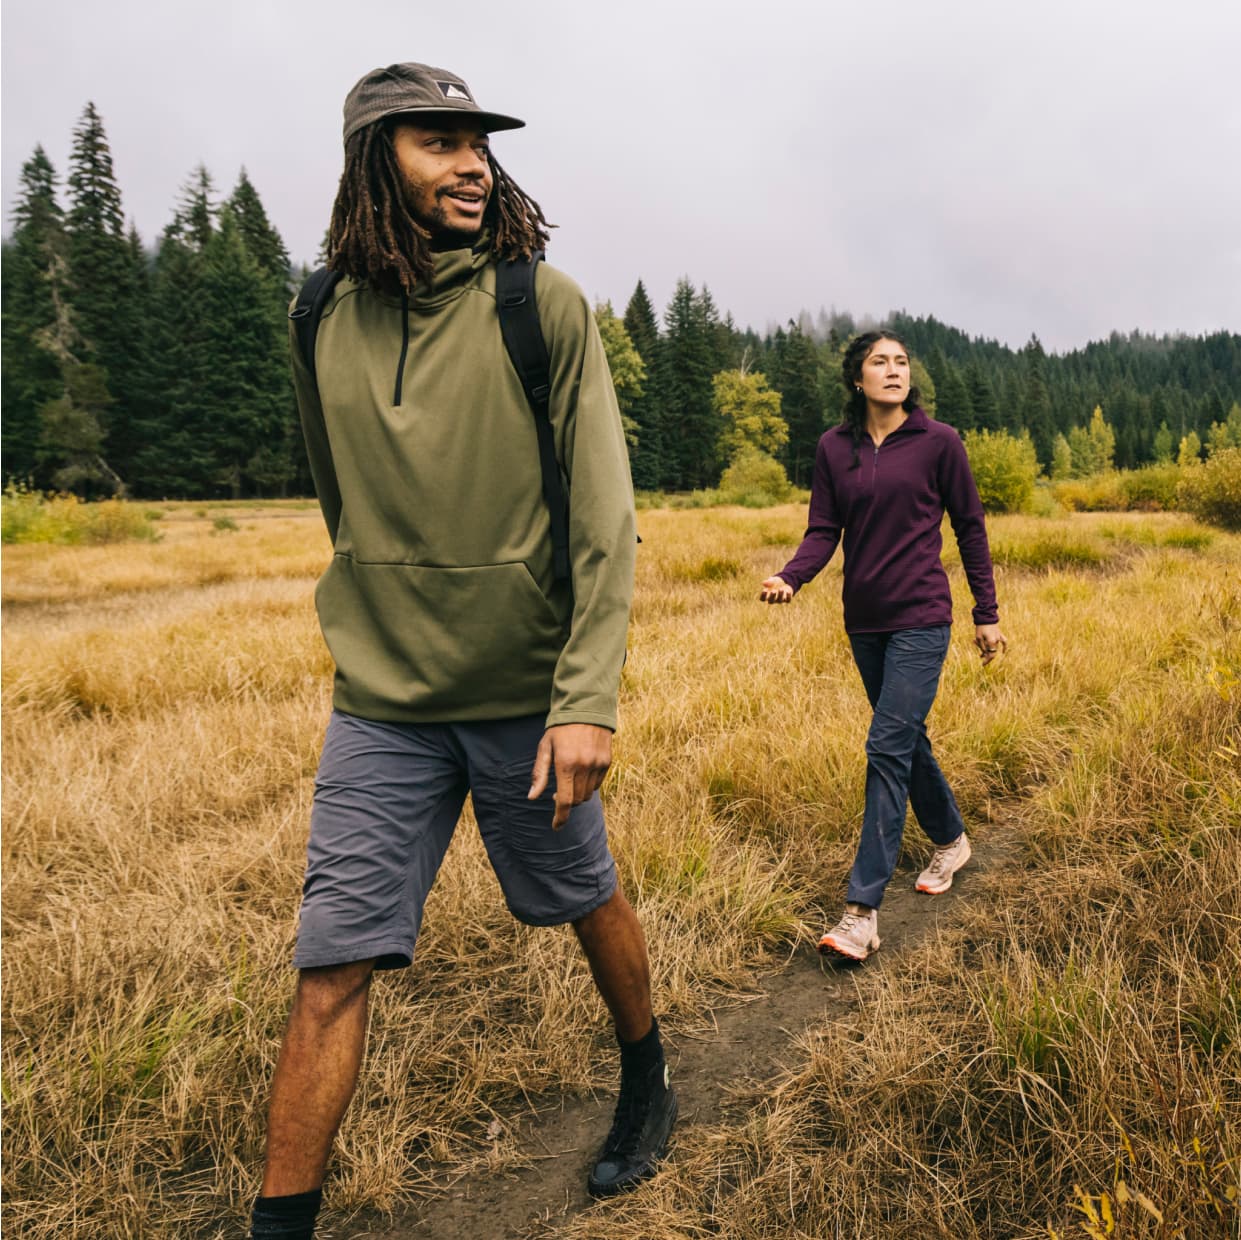 Hikers walk through a grassy field bordered by pine forest.